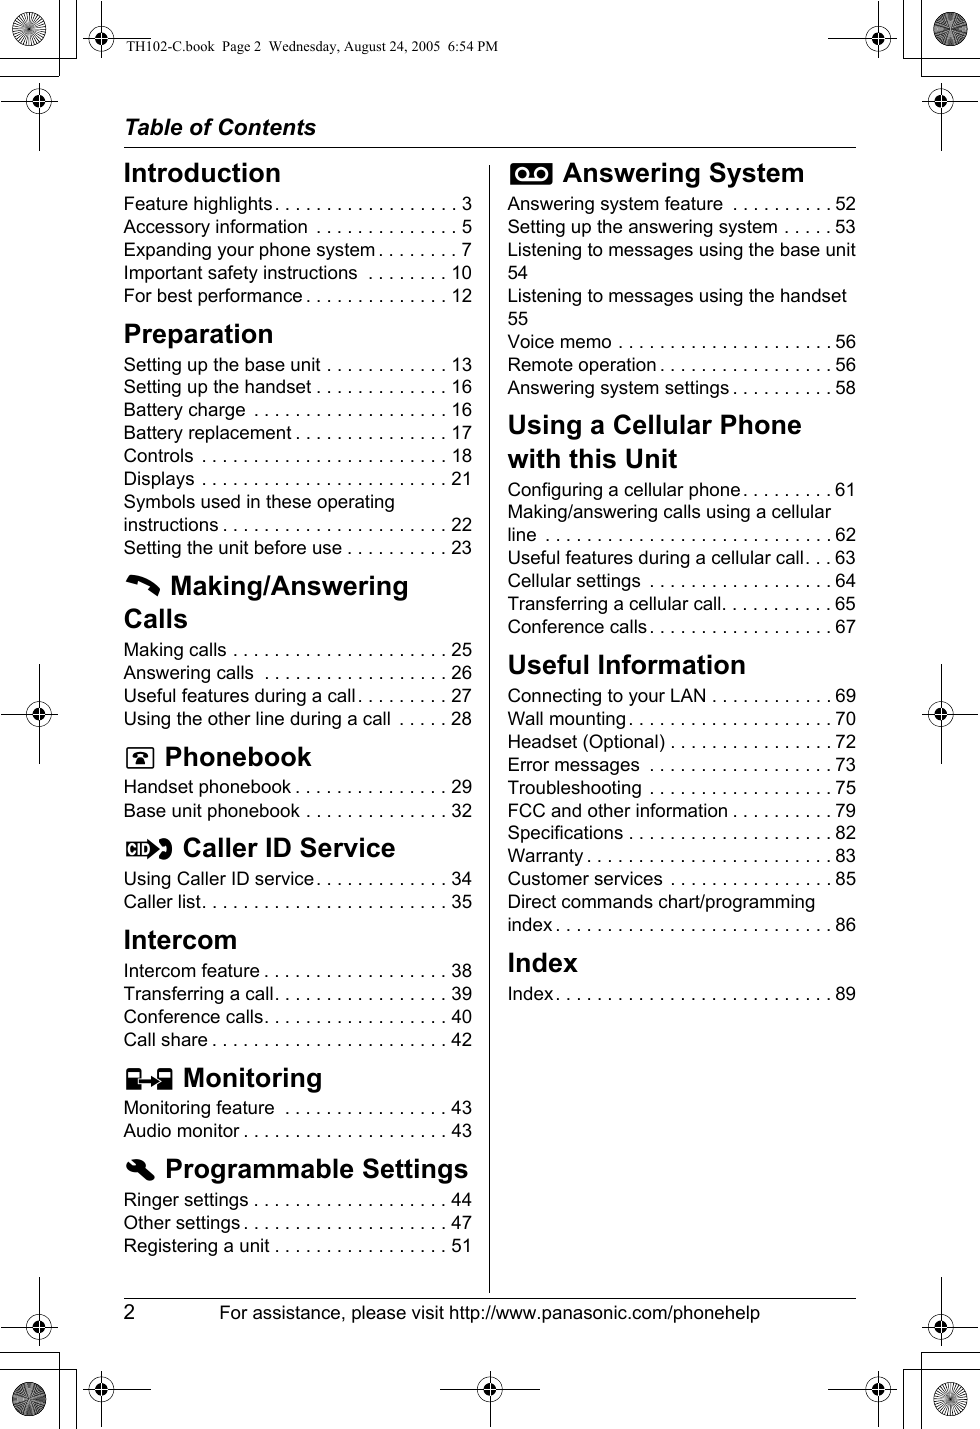 Table of Contents2For assistance, please visit http://www.panasonic.com/phonehelpIntroductionFeature highlights. . . . . . . . . . . . . . . . . . 3Accessory information  . . . . . . . . . . . . . . 5Expanding your phone system . . . . . . . . 7Important safety instructions  . . . . . . . . 10For best performance . . . . . . . . . . . . . . 12PreparationSetting up the base unit . . . . . . . . . . . . 13Setting up the handset . . . . . . . . . . . . . 16Battery charge  . . . . . . . . . . . . . . . . . . . 16Battery replacement . . . . . . . . . . . . . . . 17Controls  . . . . . . . . . . . . . . . . . . . . . . . . 18Displays . . . . . . . . . . . . . . . . . . . . . . . . 21Symbols used in these operating instructions . . . . . . . . . . . . . . . . . . . . . . 22Setting the unit before use . . . . . . . . . . 23C Making/Answering CallsMaking calls . . . . . . . . . . . . . . . . . . . . . 25Answering calls  . . . . . . . . . . . . . . . . . . 26Useful features during a call. . . . . . . . . 27Using the other line during a call  . . . . . 28q PhonebookHandset phonebook . . . . . . . . . . . . . . . 29Base unit phonebook . . . . . . . . . . . . . . 32G Caller ID ServiceUsing Caller ID service. . . . . . . . . . . . . 34Caller list. . . . . . . . . . . . . . . . . . . . . . . . 35IntercomIntercom feature . . . . . . . . . . . . . . . . . . 38Transferring a call. . . . . . . . . . . . . . . . . 39Conference calls. . . . . . . . . . . . . . . . . . 40Call share . . . . . . . . . . . . . . . . . . . . . . . 42H MonitoringMonitoring feature  . . . . . . . . . . . . . . . . 43Audio monitor . . . . . . . . . . . . . . . . . . . . 43h Programmable SettingsRinger settings . . . . . . . . . . . . . . . . . . . 44Other settings . . . . . . . . . . . . . . . . . . . . 47Registering a unit . . . . . . . . . . . . . . . . . 51i Answering SystemAnswering system feature  . . . . . . . . . . 52Setting up the answering system . . . . . 53Listening to messages using the base unit54Listening to messages using the handset55Voice memo . . . . . . . . . . . . . . . . . . . . . 56Remote operation . . . . . . . . . . . . . . . . . 56Answering system settings . . . . . . . . . . 58Using a Cellular Phone with this UnitConfiguring a cellular phone . . . . . . . . . 61Making/answering calls using a cellular line  . . . . . . . . . . . . . . . . . . . . . . . . . . . . 62Useful features during a cellular call. . . 63Cellular settings  . . . . . . . . . . . . . . . . . . 64Transferring a cellular call. . . . . . . . . . . 65Conference calls. . . . . . . . . . . . . . . . . . 67Useful InformationConnecting to your LAN . . . . . . . . . . . . 69Wall mounting. . . . . . . . . . . . . . . . . . . . 70Headset (Optional) . . . . . . . . . . . . . . . . 72Error messages  . . . . . . . . . . . . . . . . . . 73Troubleshooting . . . . . . . . . . . . . . . . . . 75FCC and other information . . . . . . . . . . 79Specifications . . . . . . . . . . . . . . . . . . . . 82Warranty . . . . . . . . . . . . . . . . . . . . . . . . 83Customer services . . . . . . . . . . . . . . . . 85Direct commands chart/programming index . . . . . . . . . . . . . . . . . . . . . . . . . . . 86IndexIndex. . . . . . . . . . . . . . . . . . . . . . . . . . . 89TH102-C.book  Page 2  Wednesday, August 24, 2005  6:54 PM